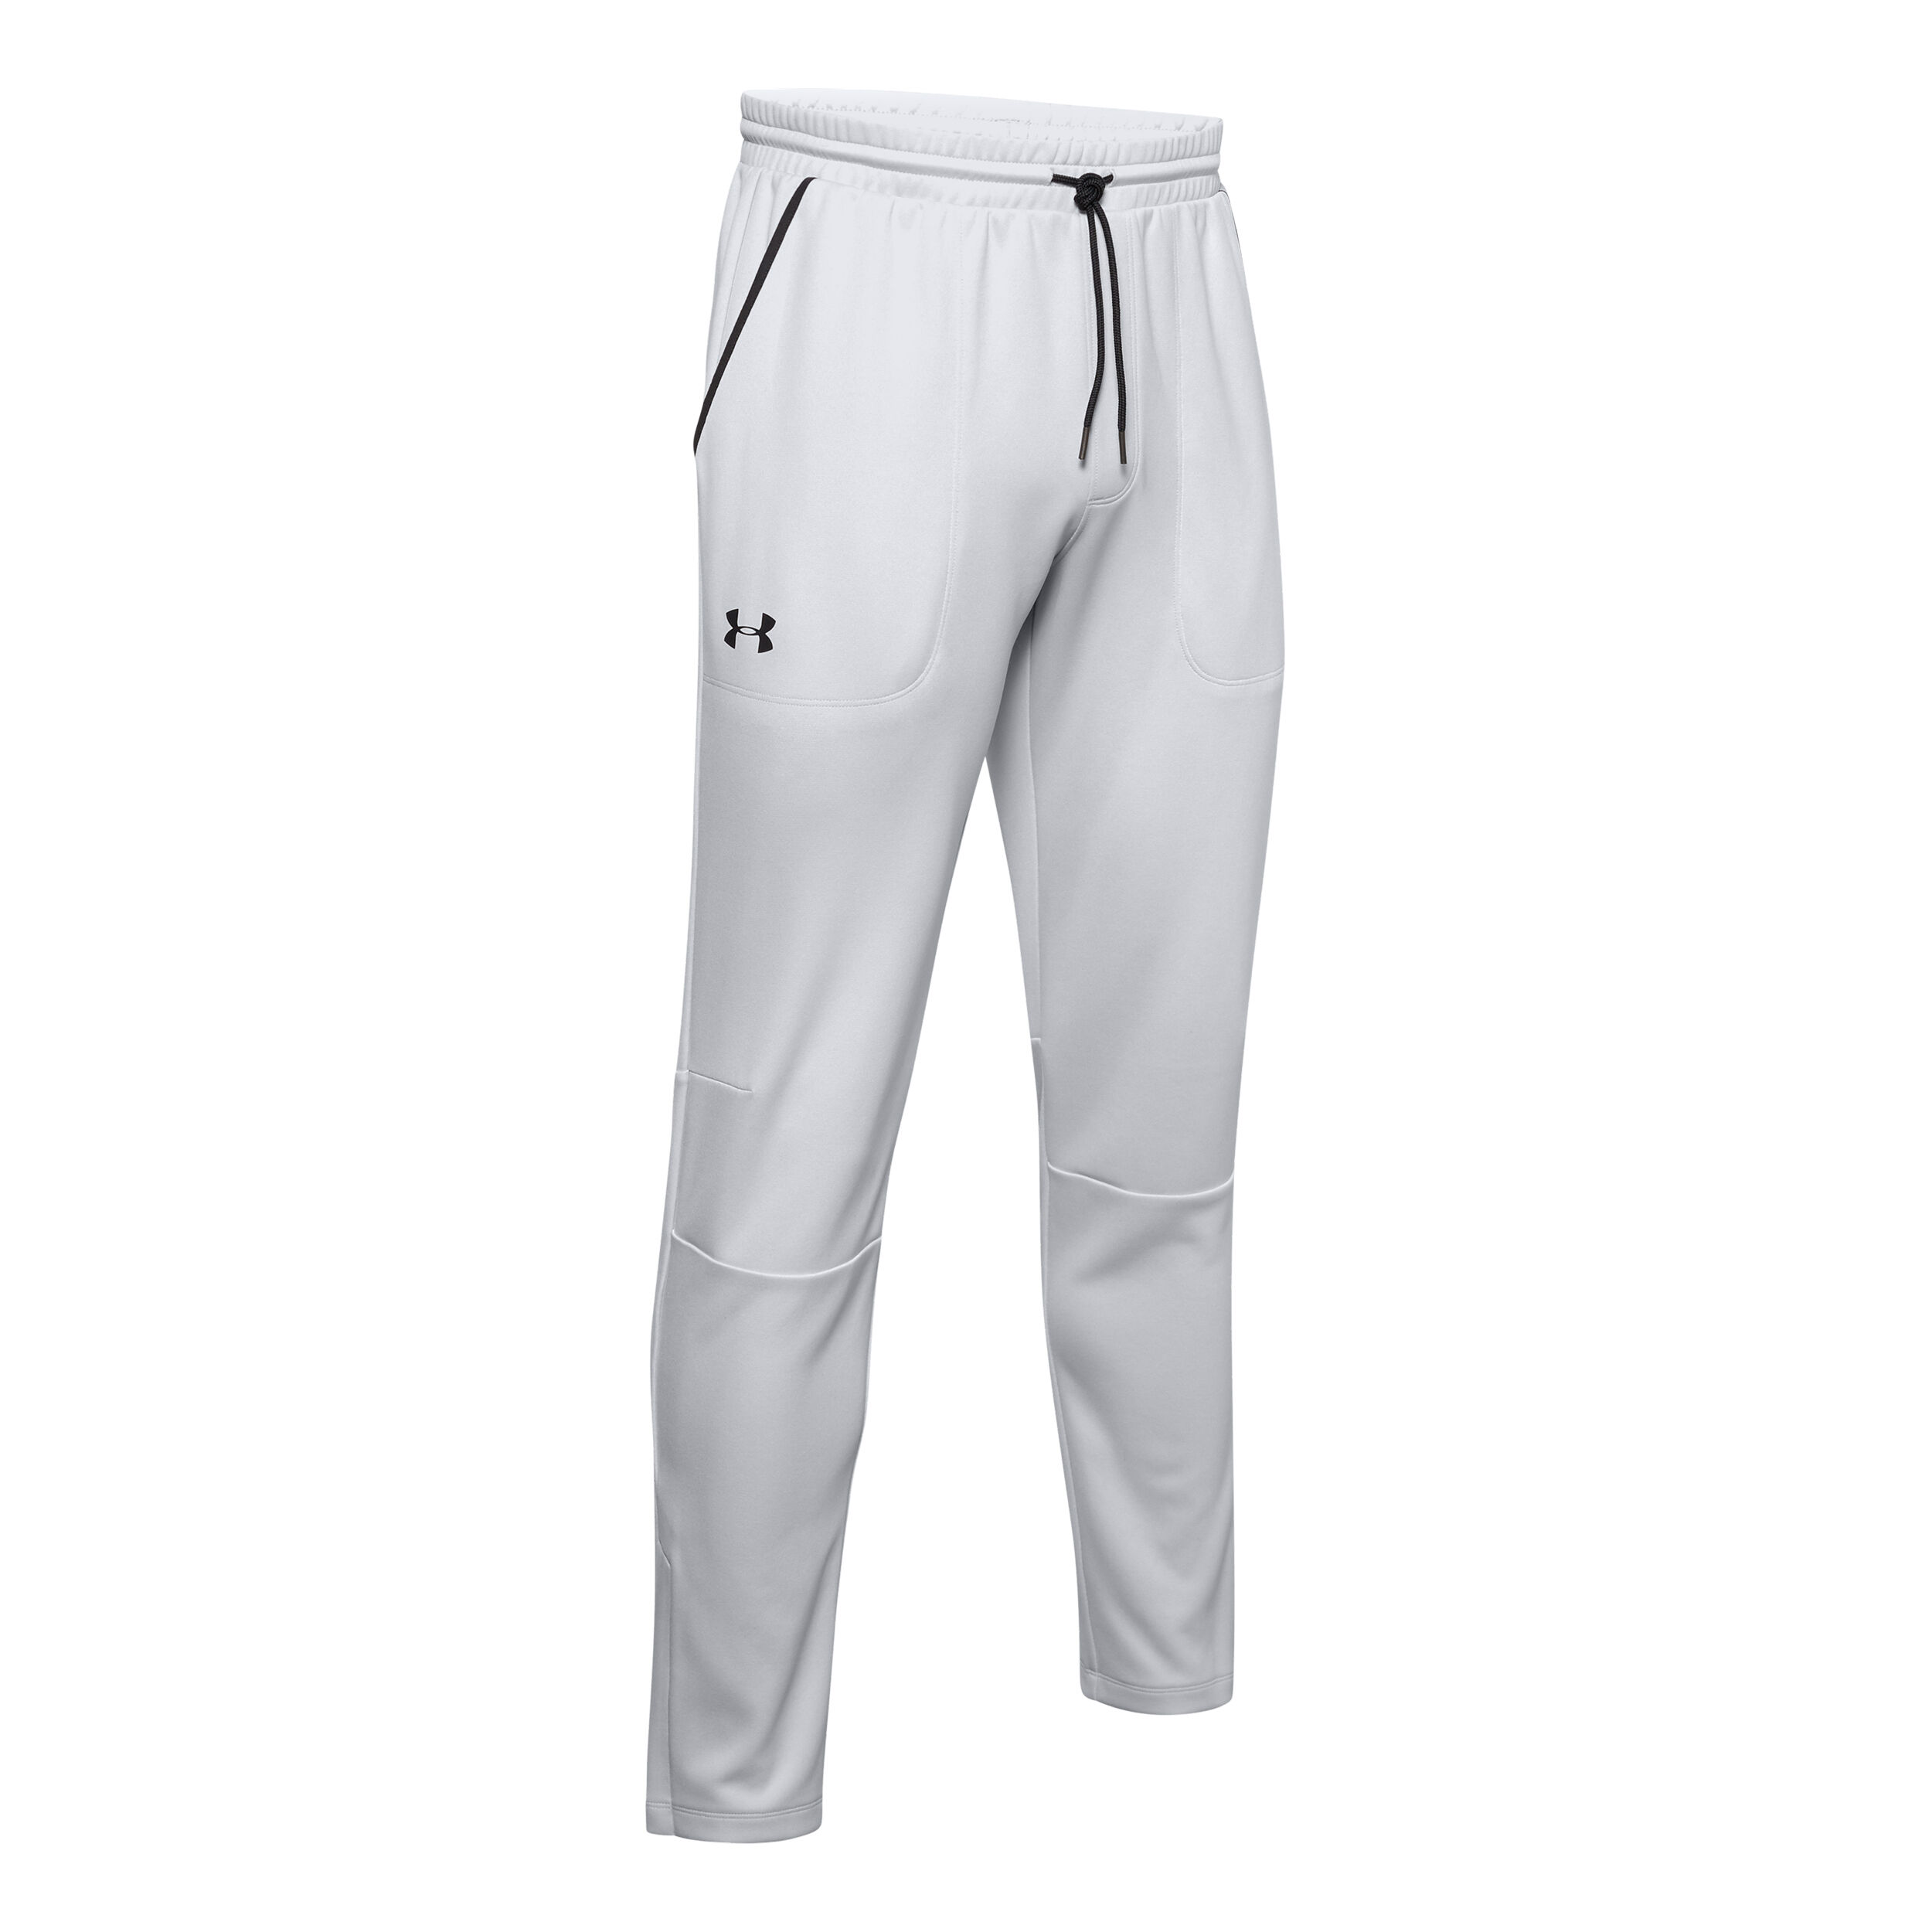 Under Armour MK1 Warmup Pants 